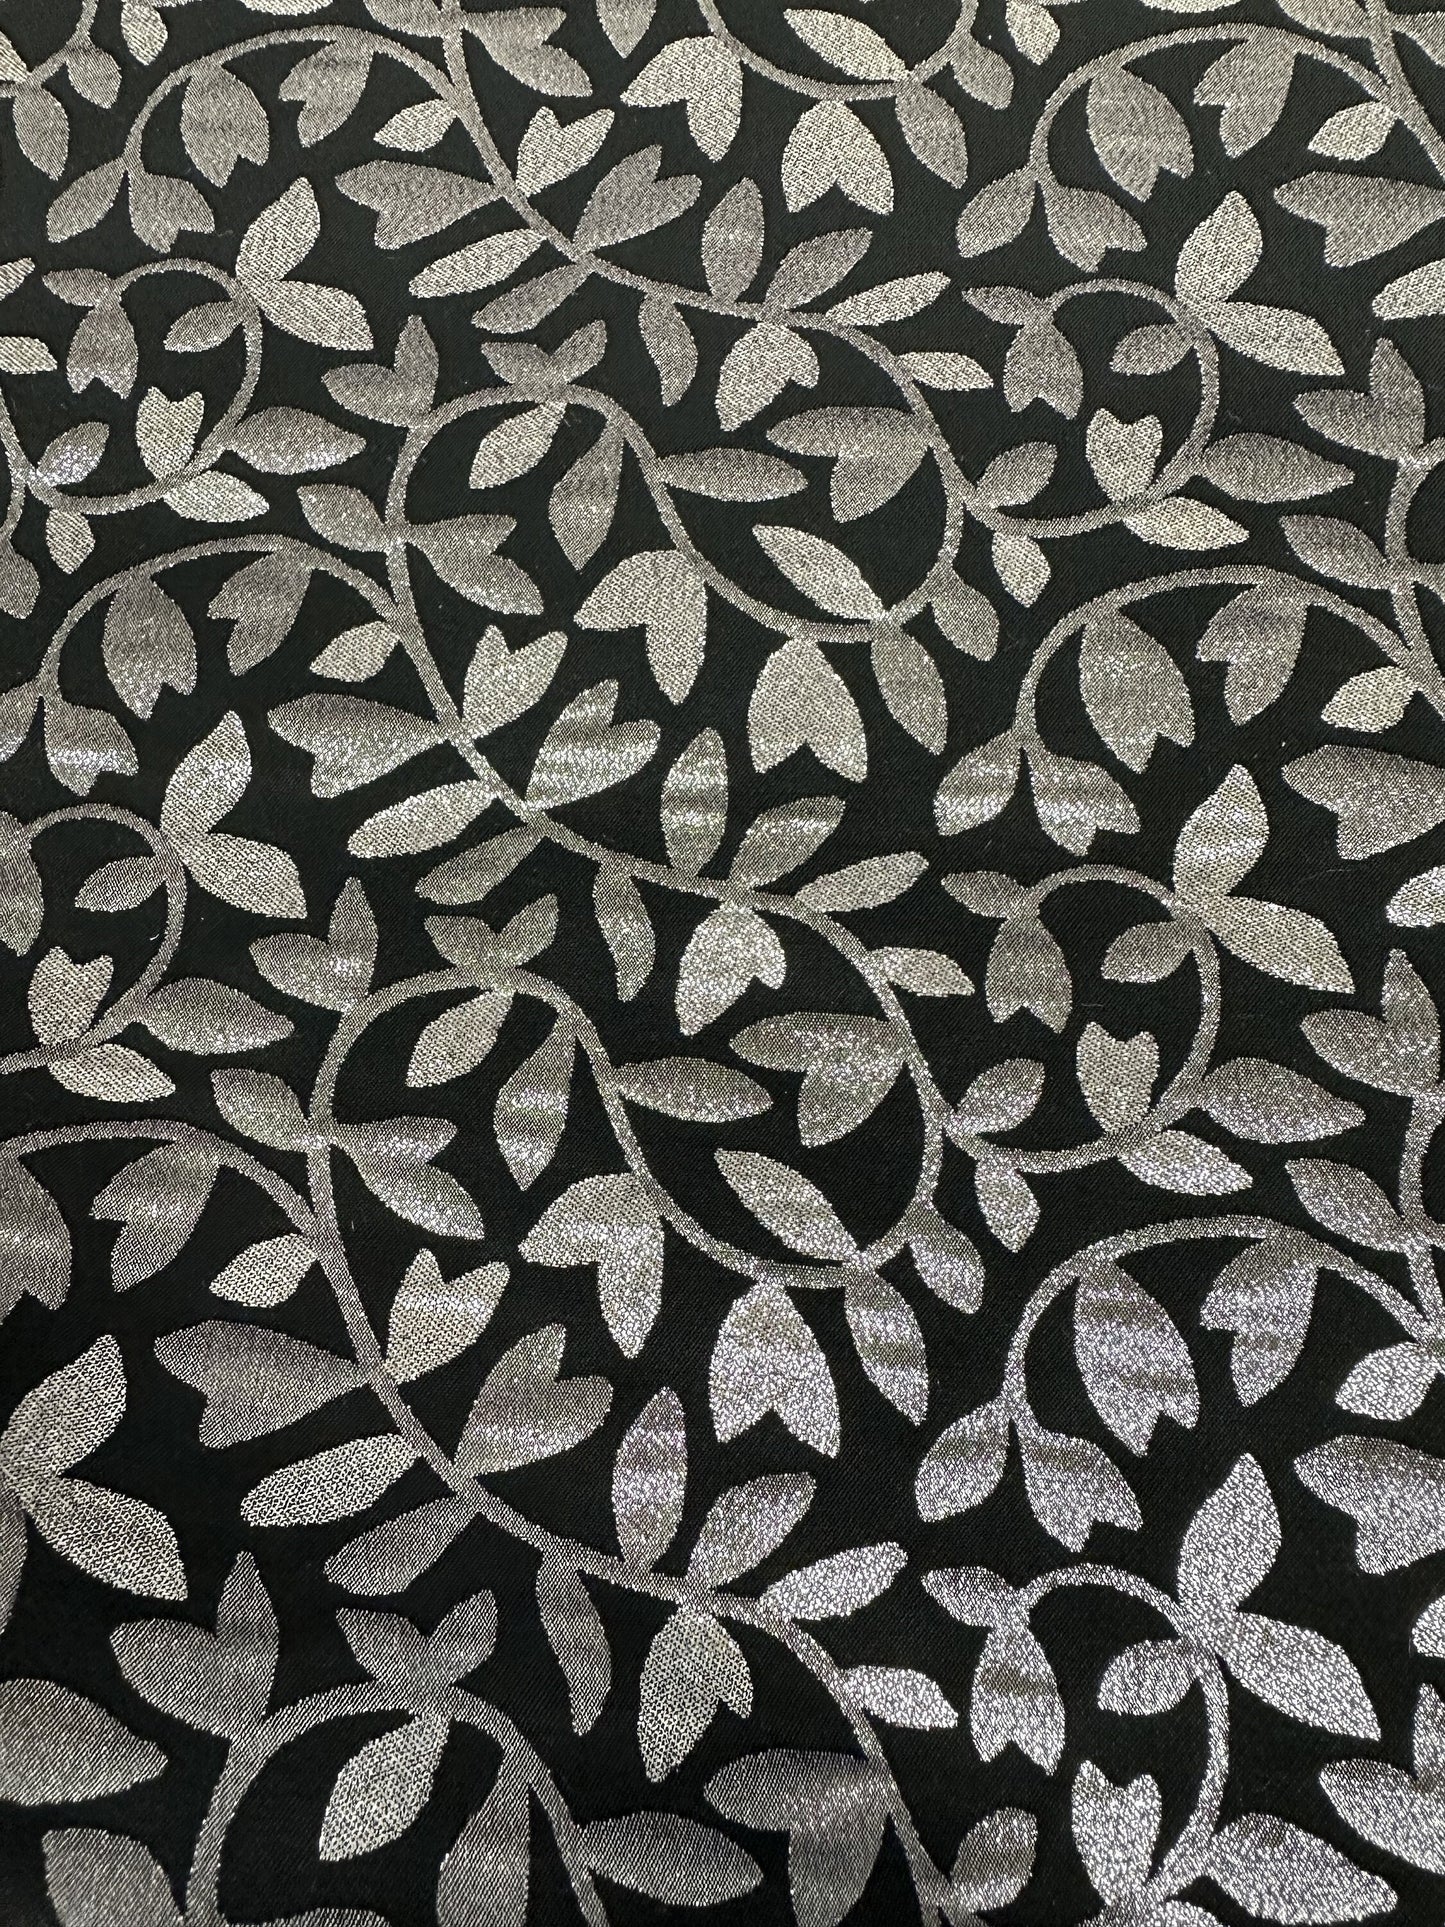 SILVER BLACK Floral Metallic Brocade Fabric (58 in.) Sold By The Yard